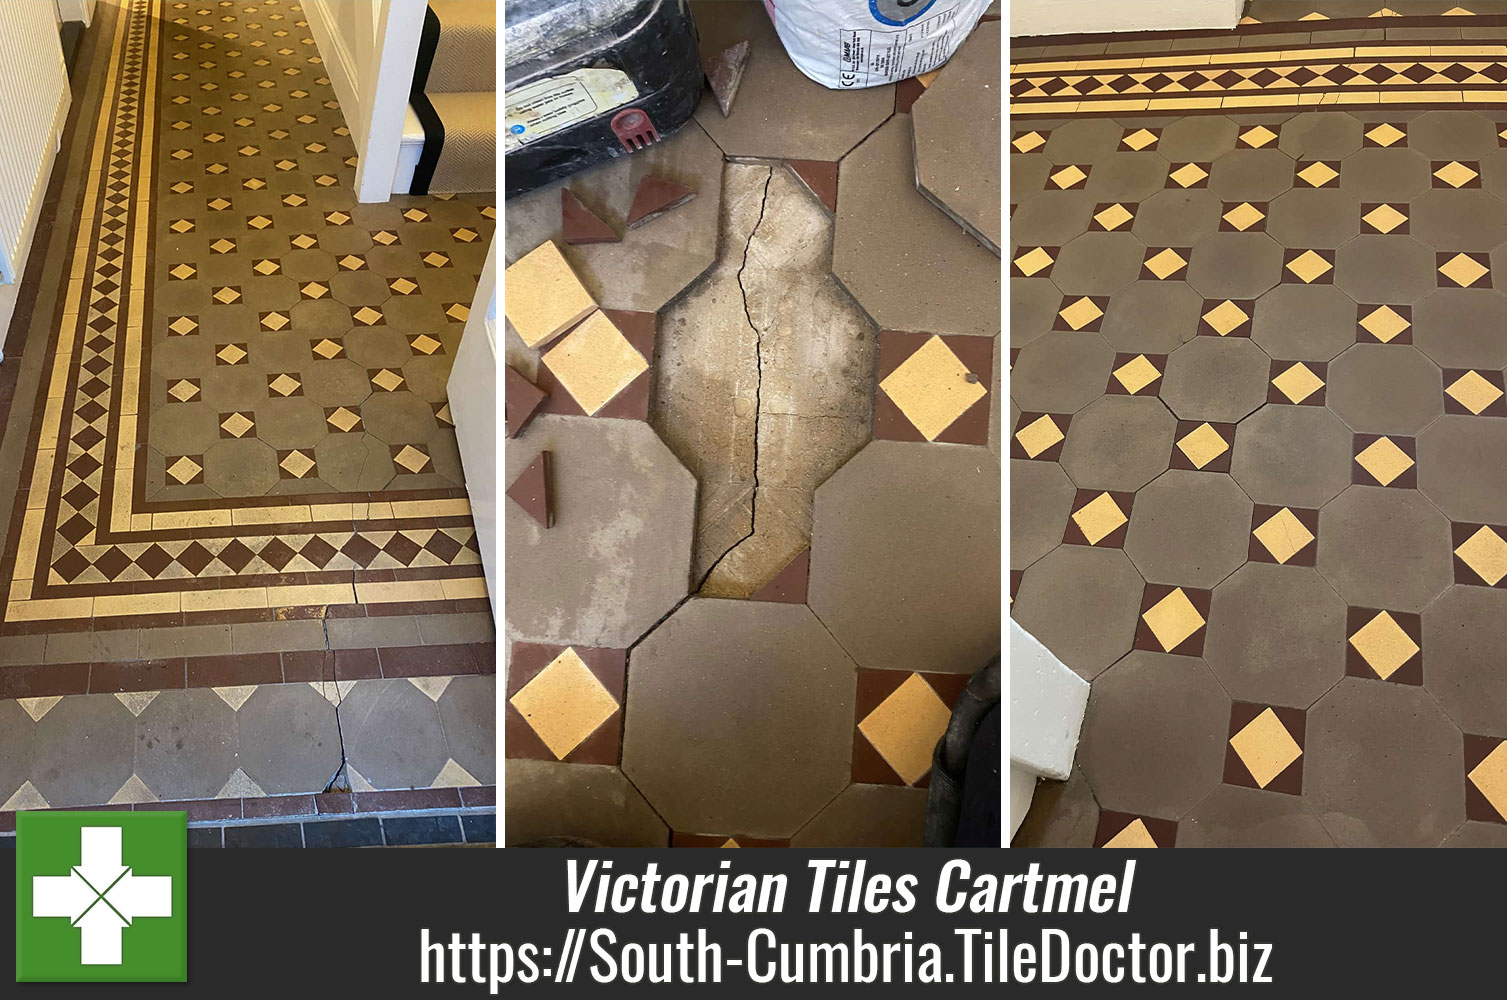 Opening the Pores on Victorian Clay Tiles with Diamond Hand Blocks in Cartmel